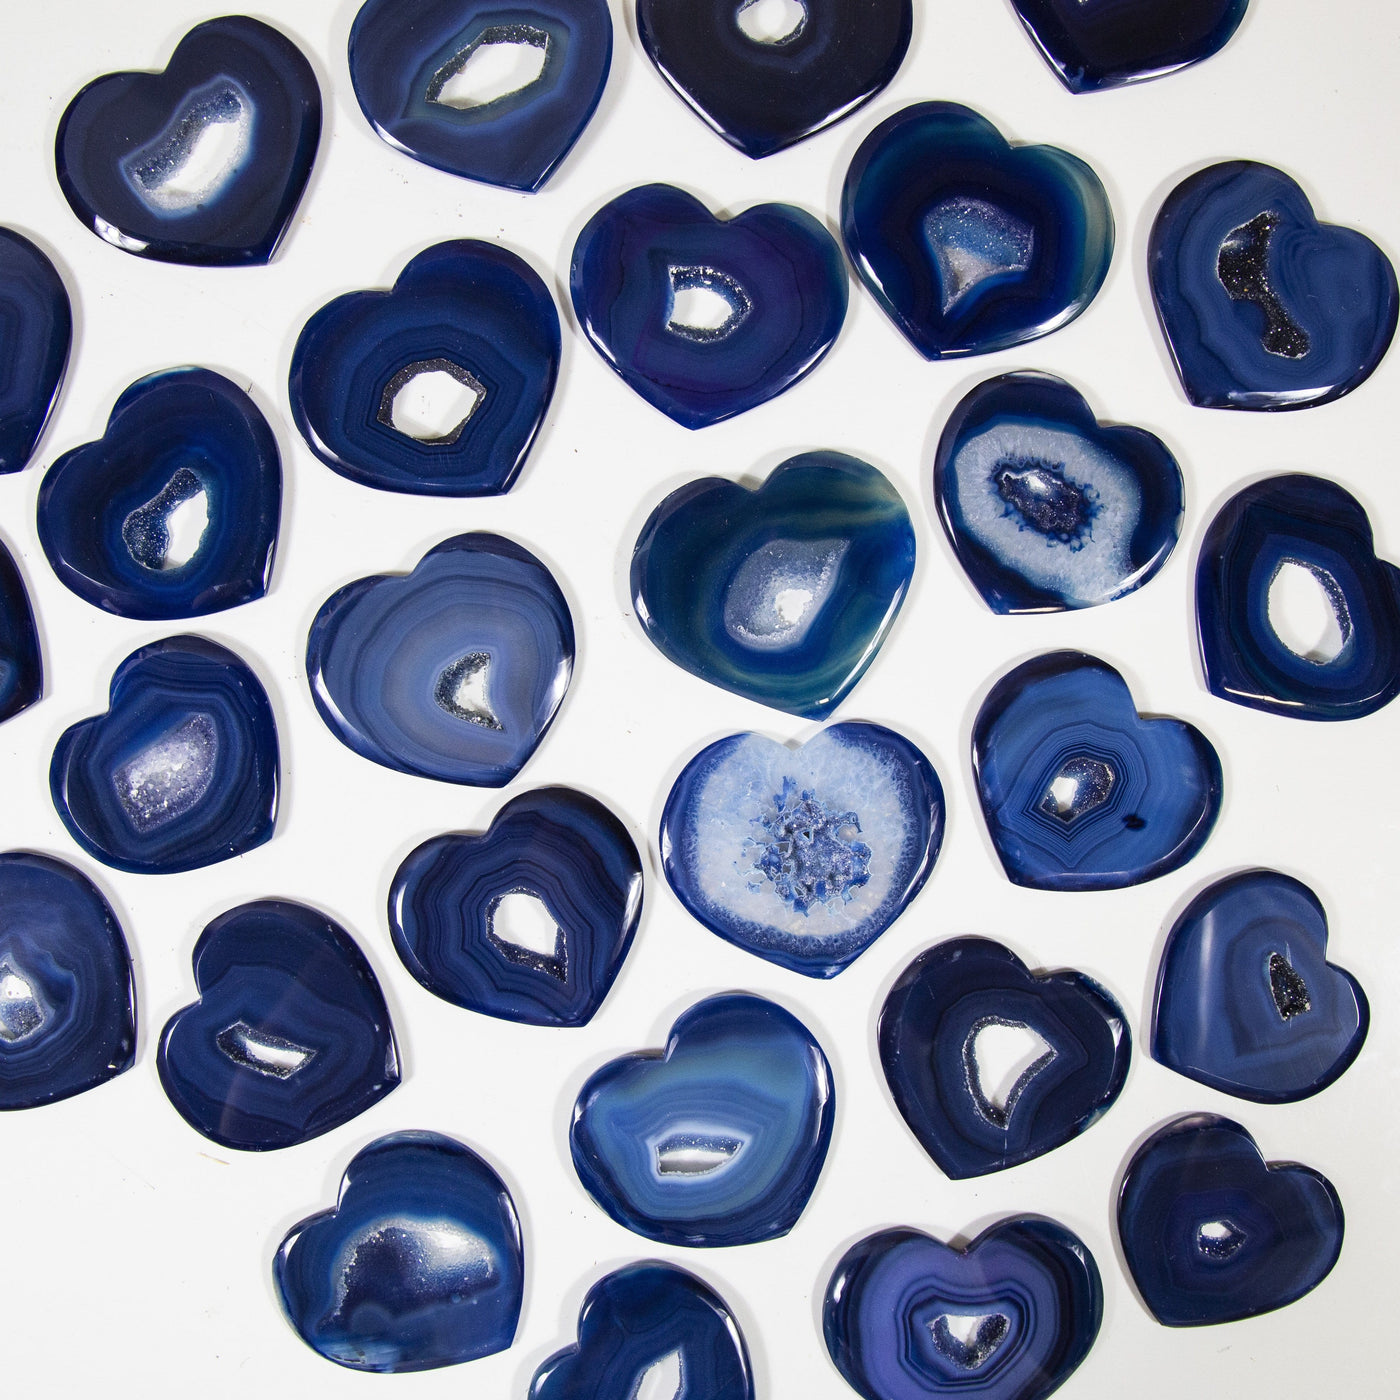 Blue Heart Shaped Agates displayed to show various colors and characteristics with stripes and druzy centers